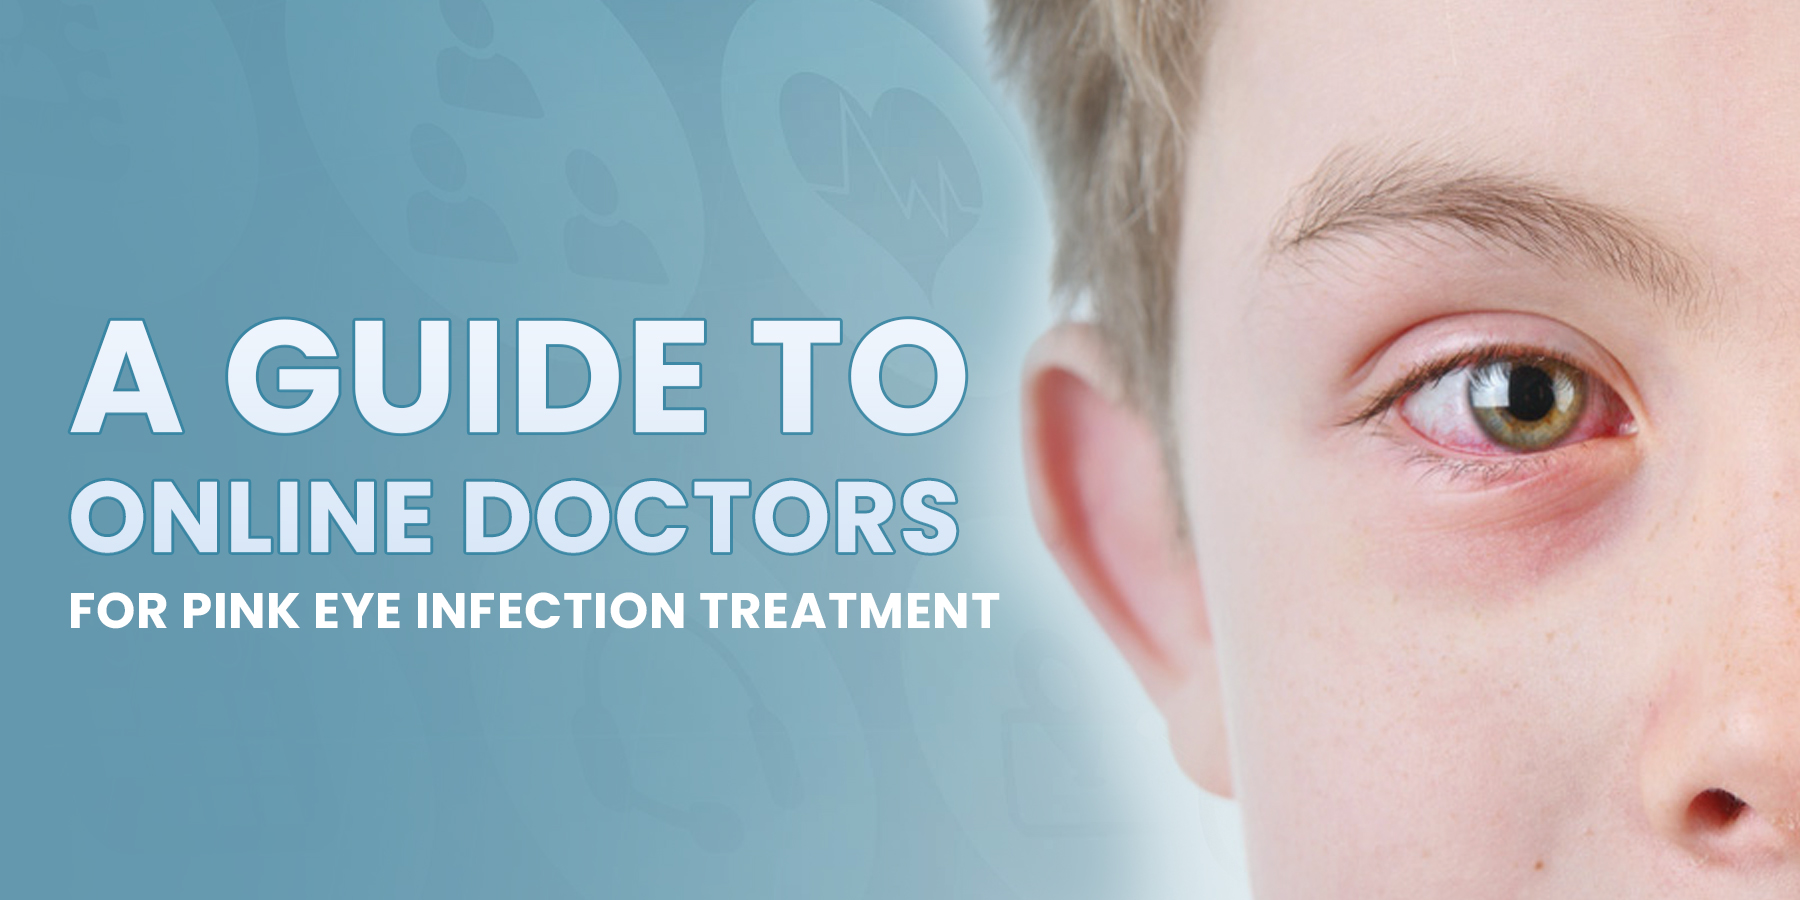 A Guide to Online Doctors for Pink Eye Infection Treatment